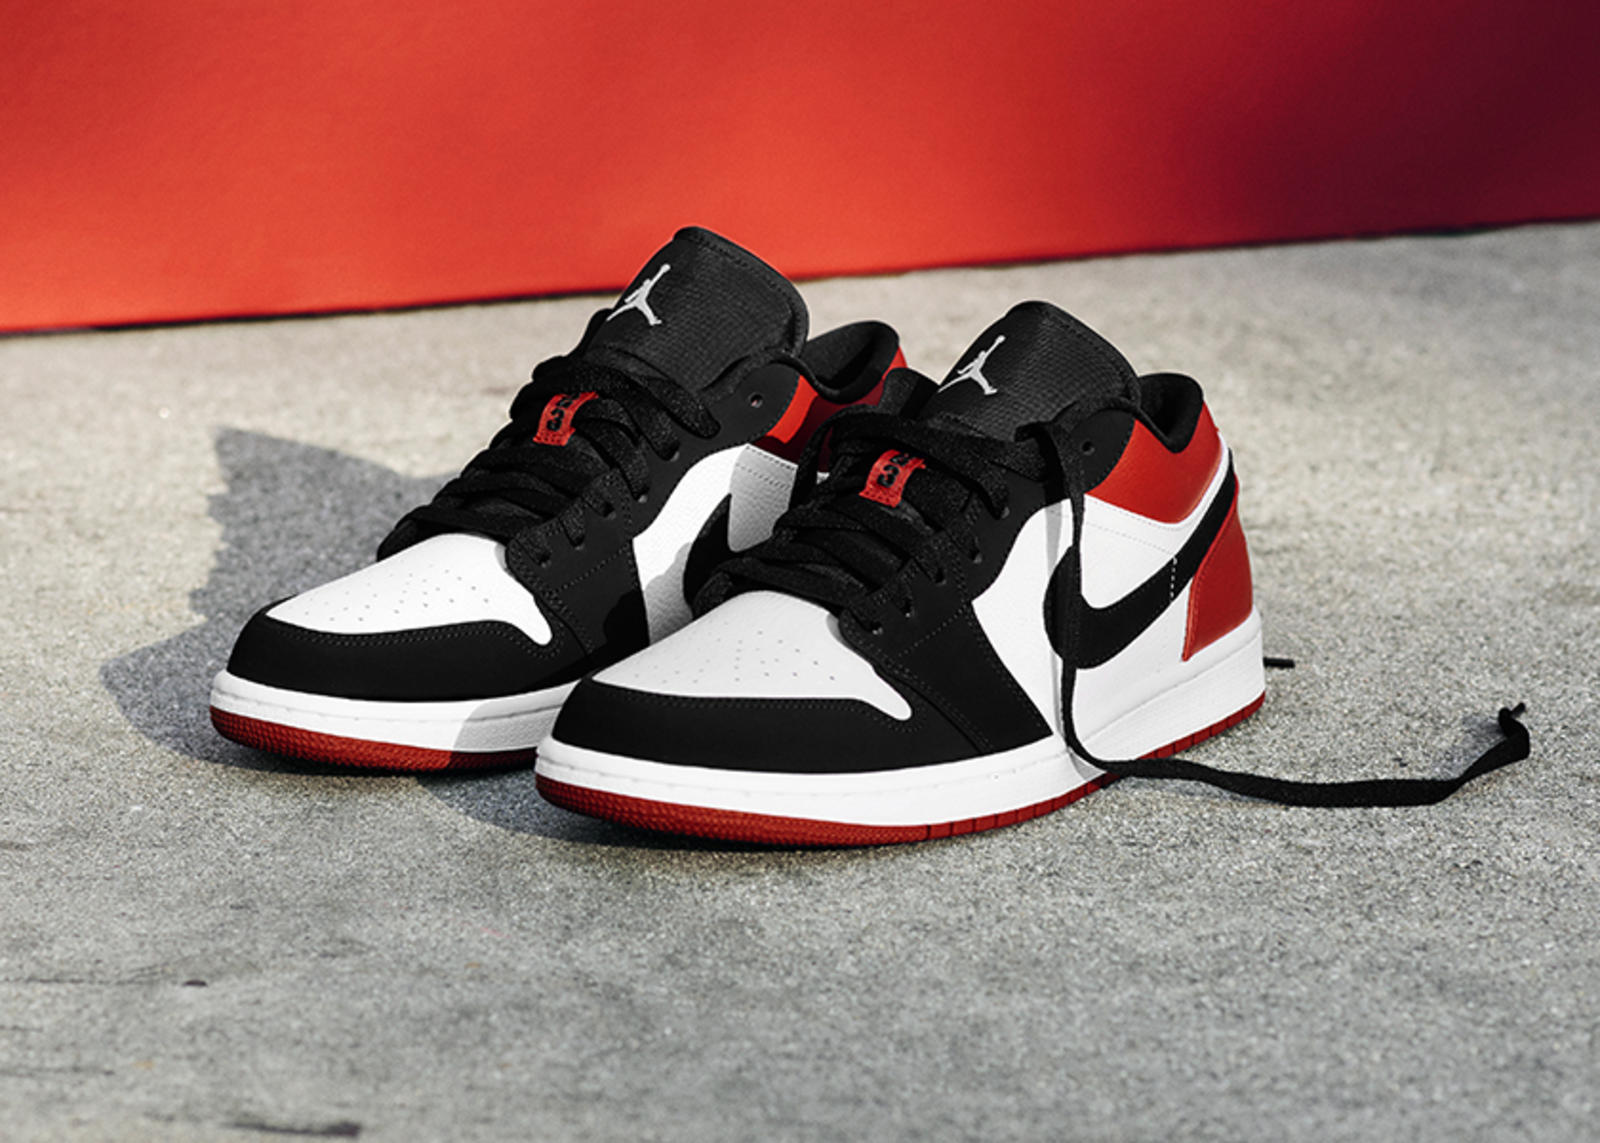 first official collaboration between jordan brand and nike sb